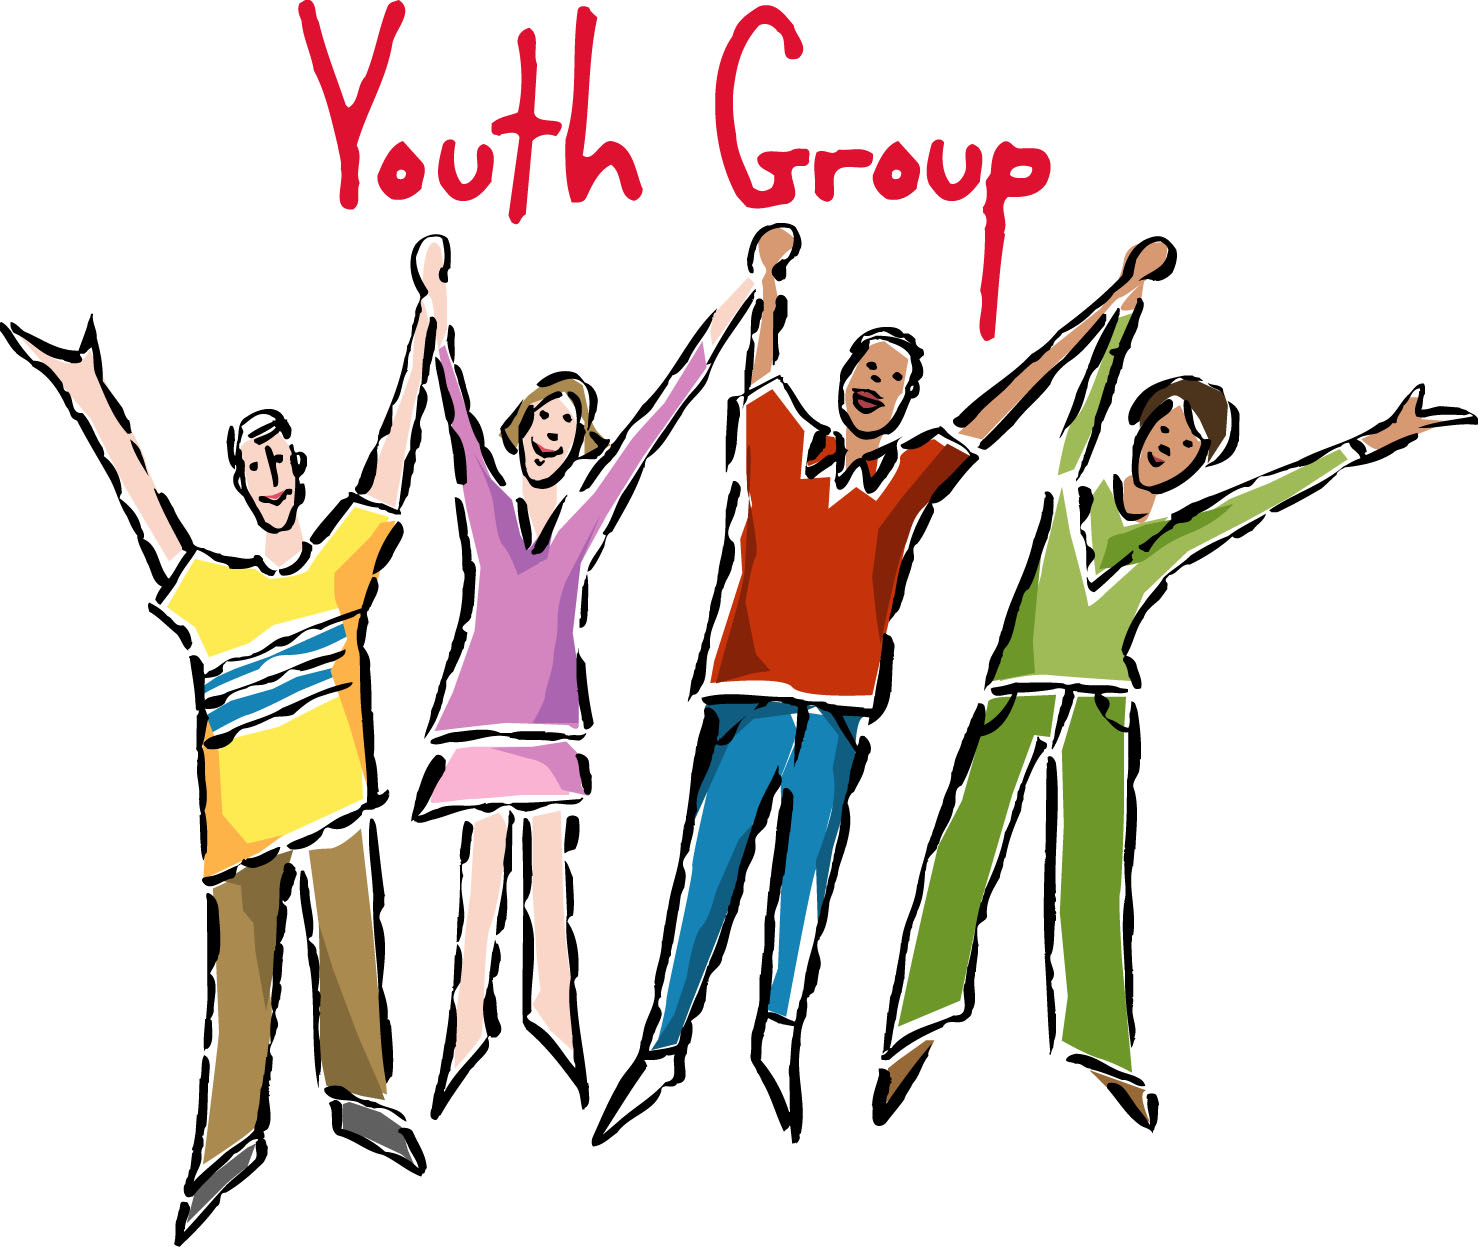 Youth Group Clip Art